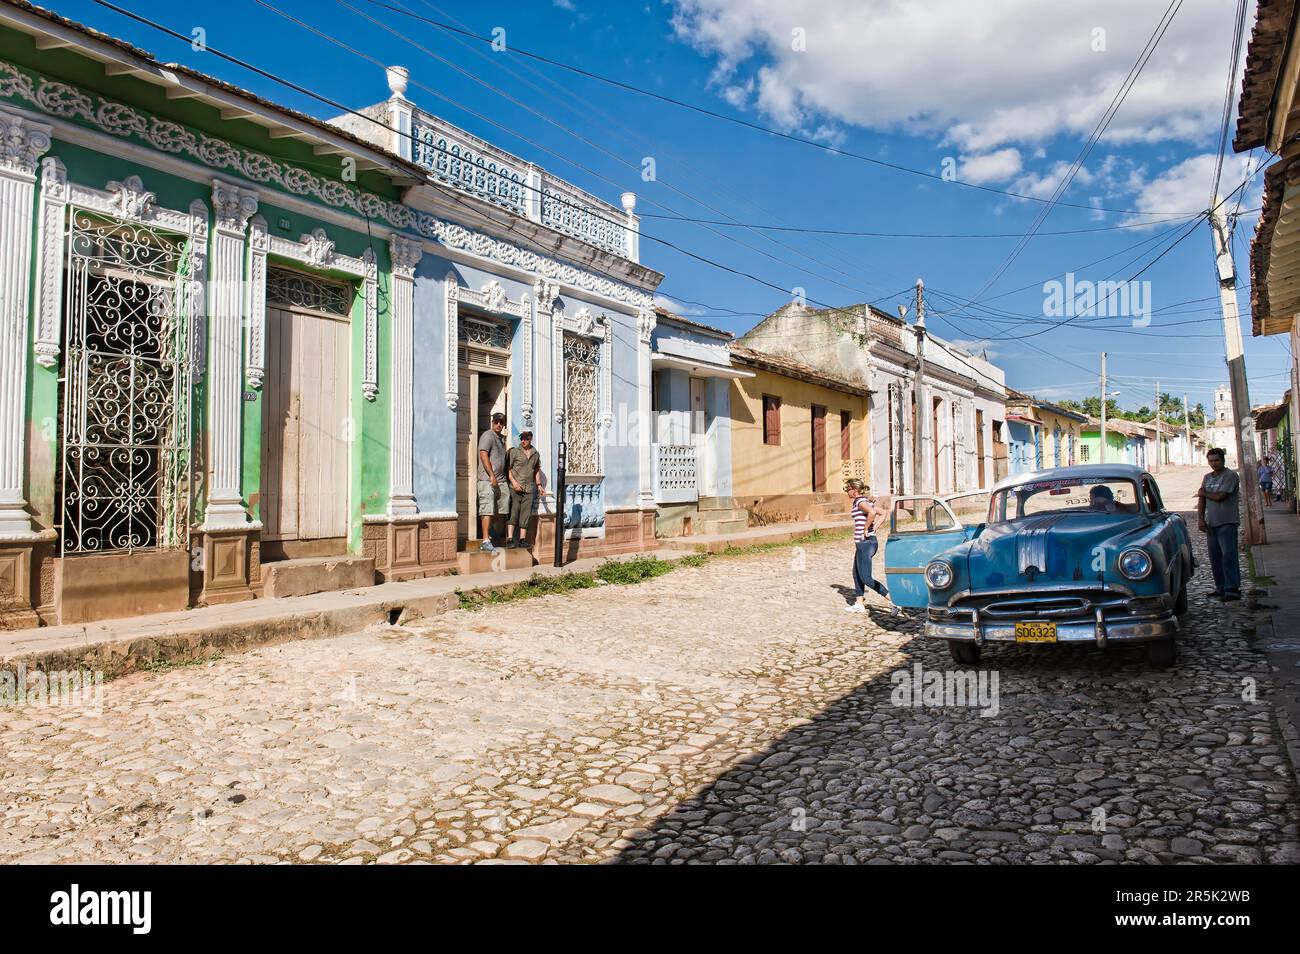 Oldtimer in front of colorful colonial Houses, Trinidad, Sancti Spiritus Province, Cuba Stock Photo